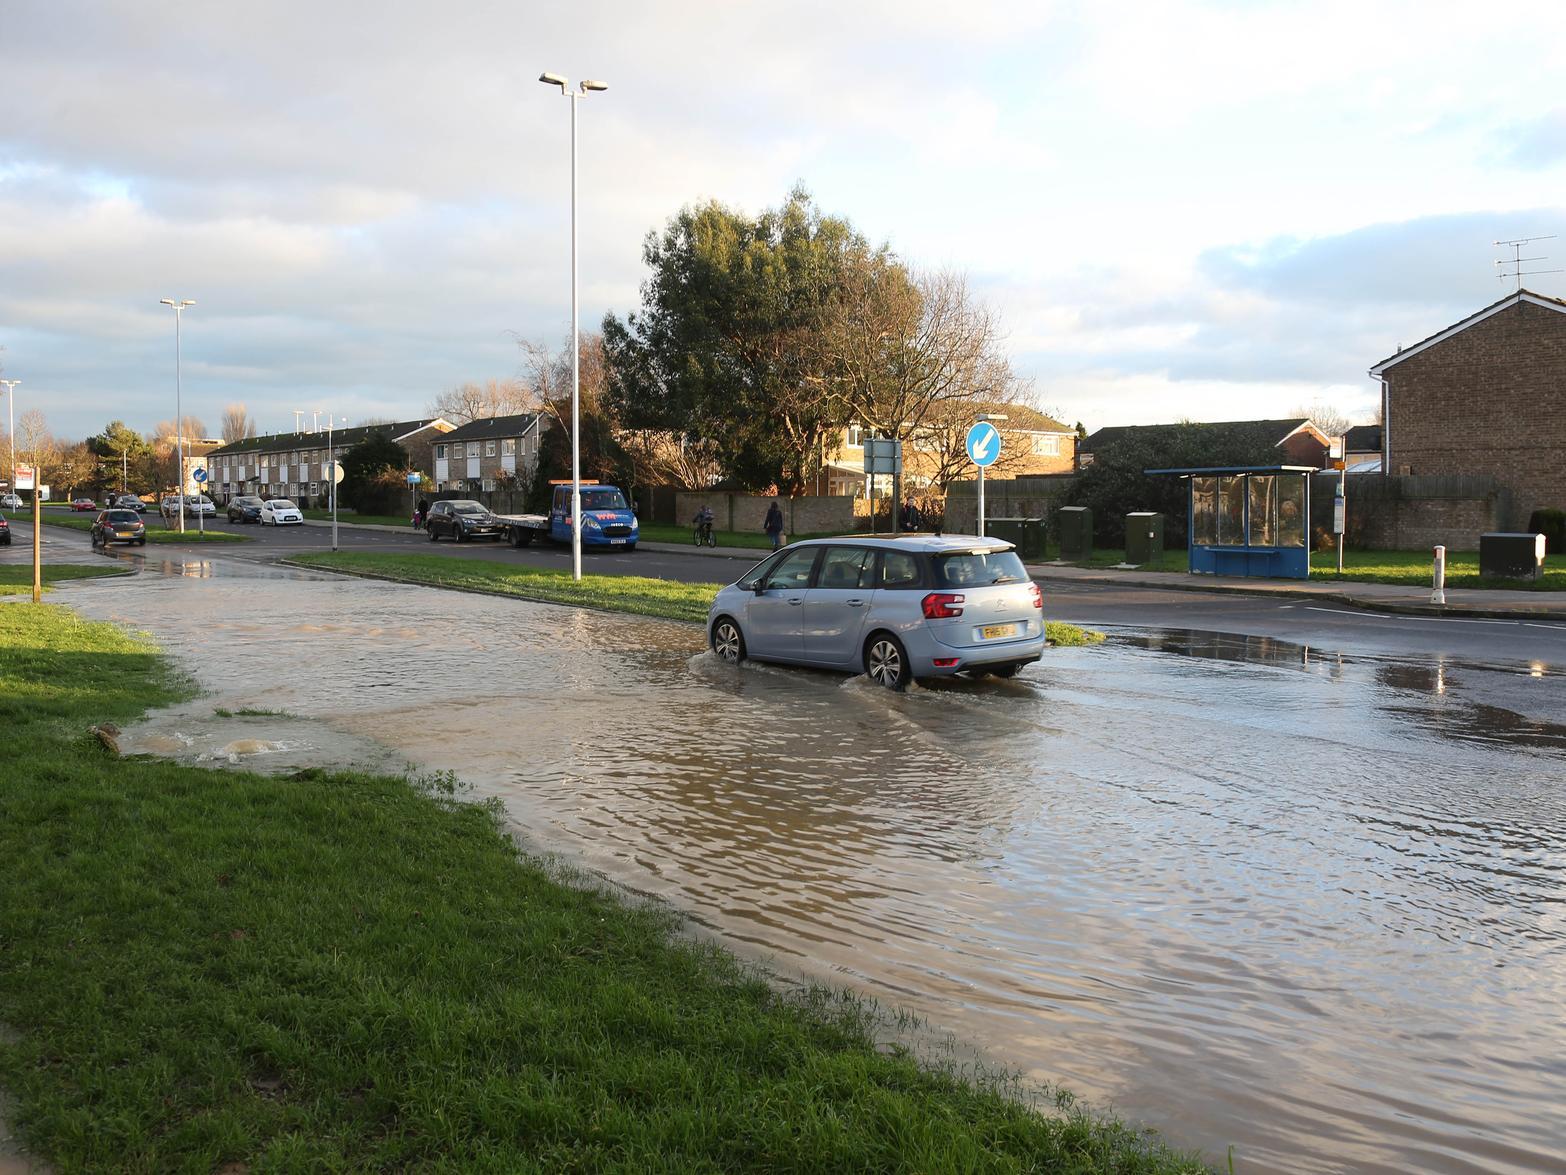 The scene of the flooding in Columbia Drive, Worthing